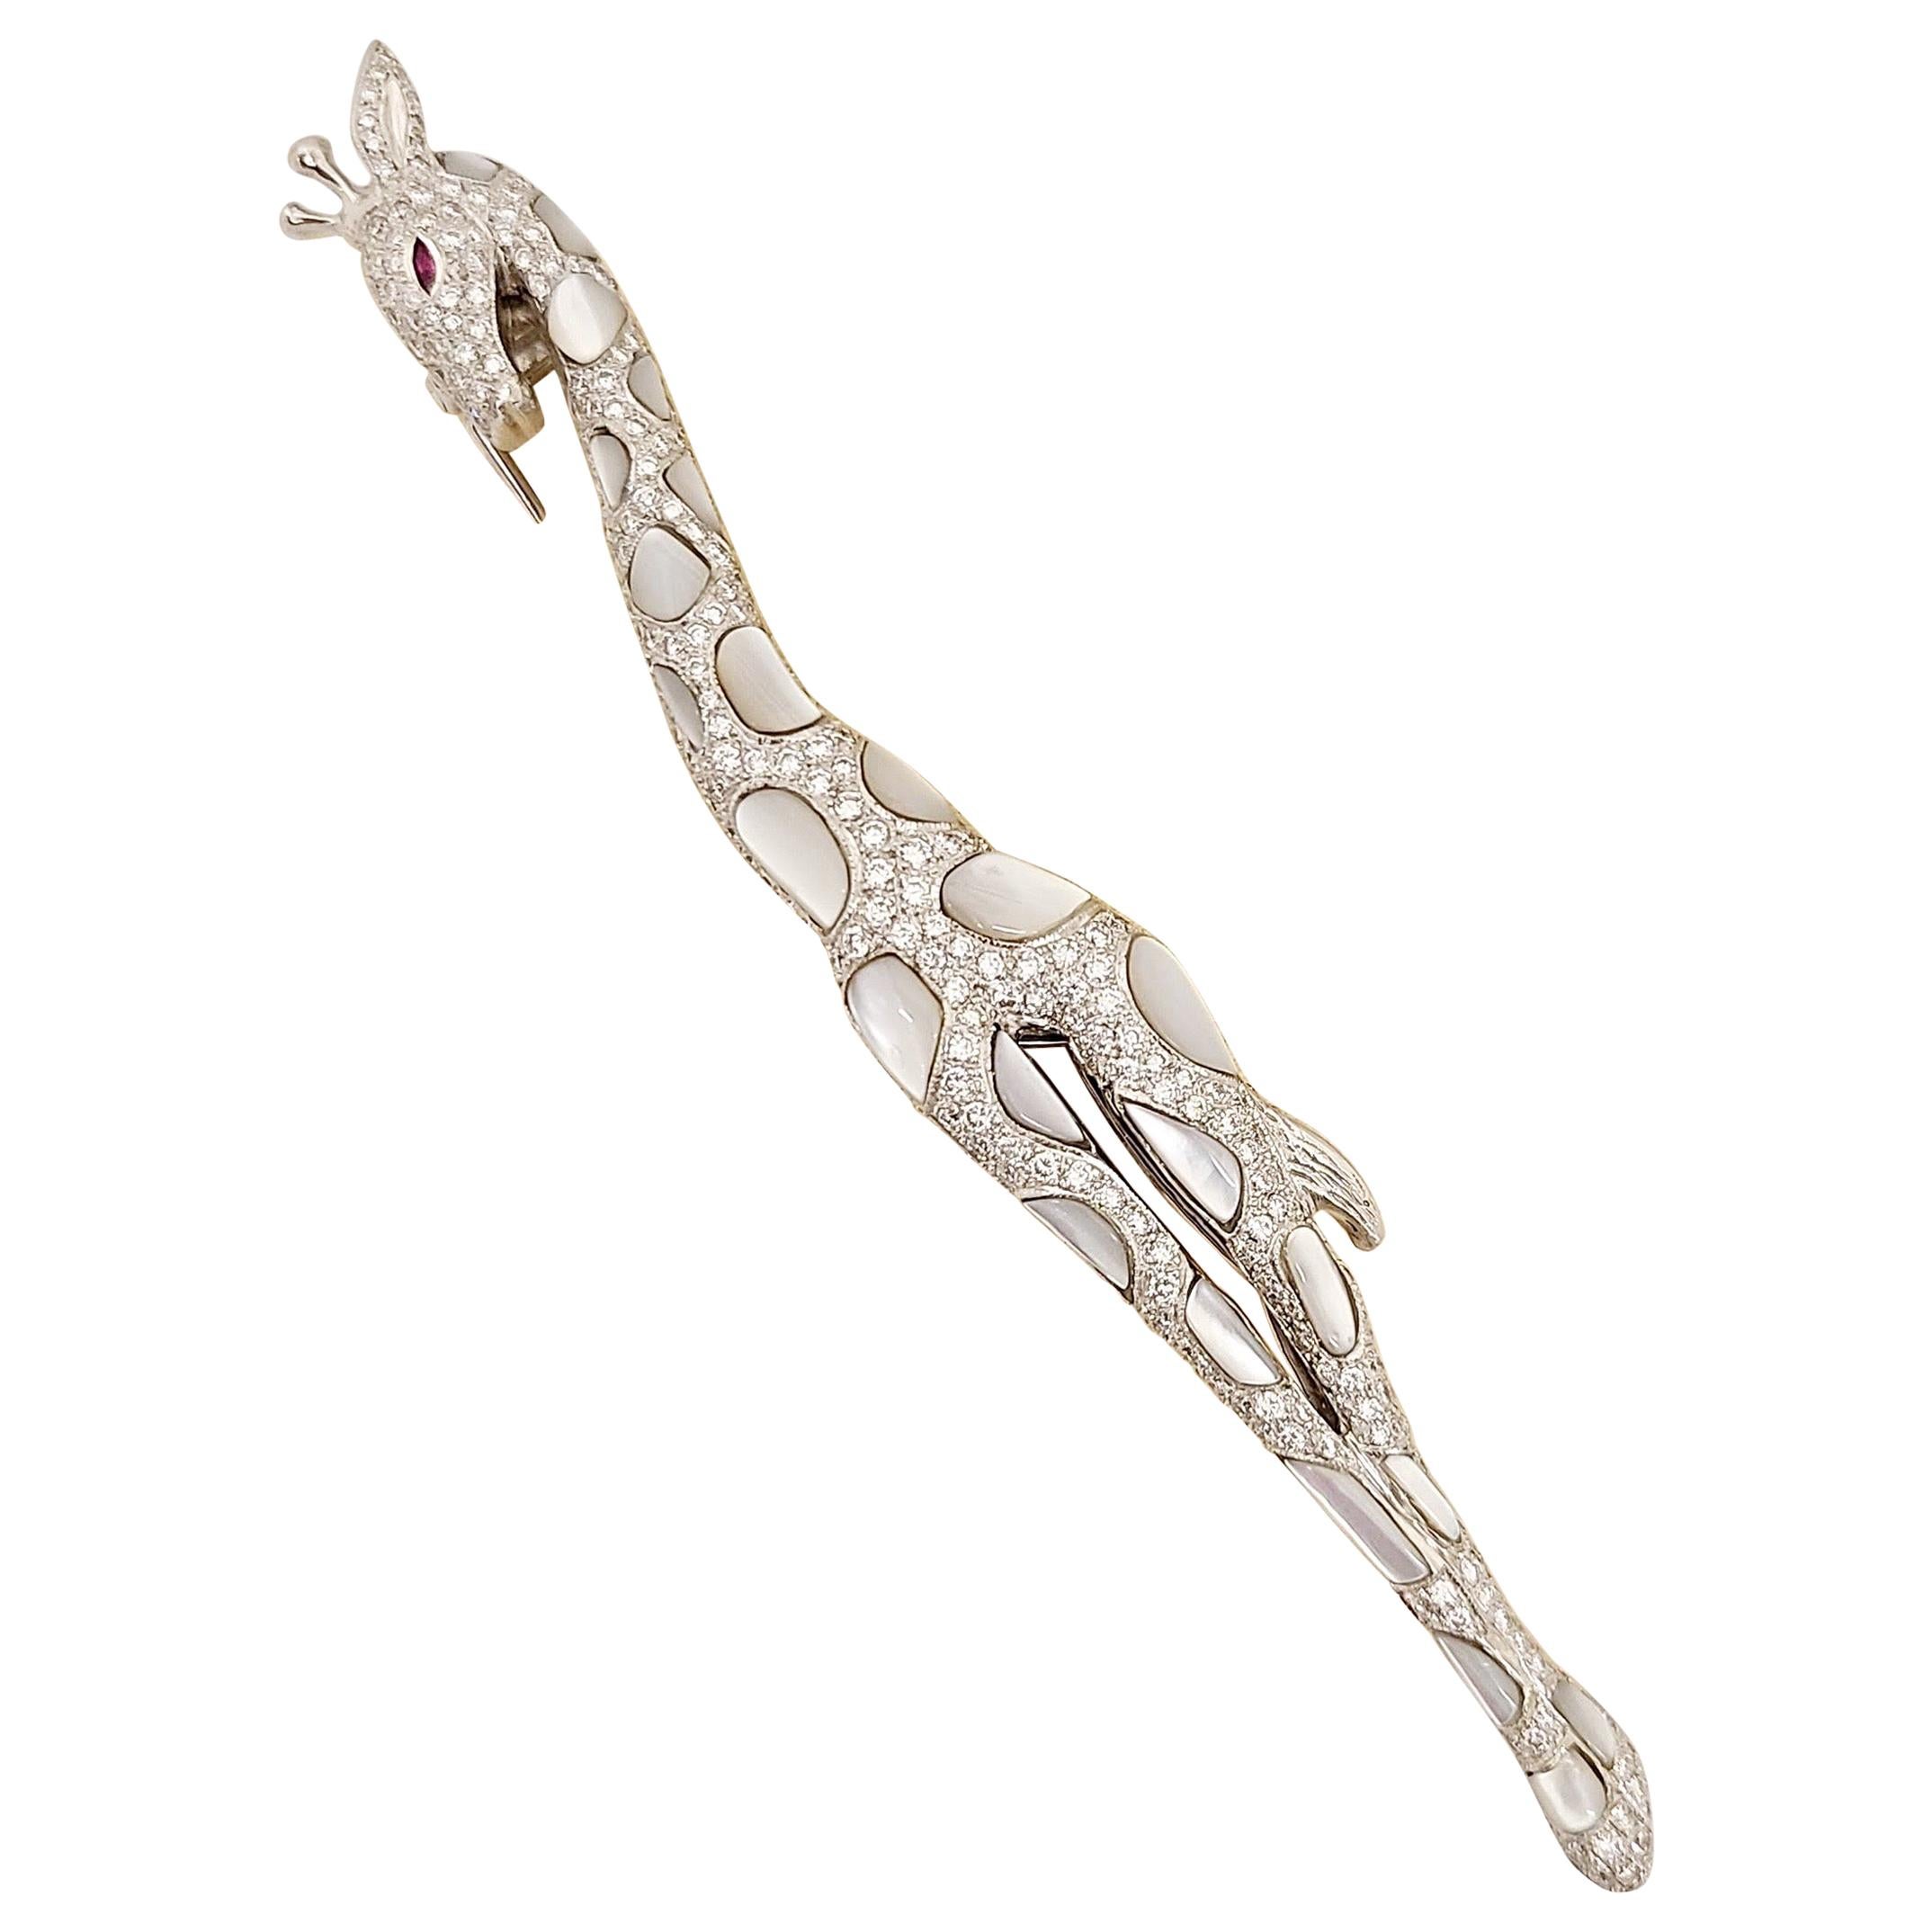 18 Karat White Gold Giraffe Brooch with Diamonds and Mother of Pearl